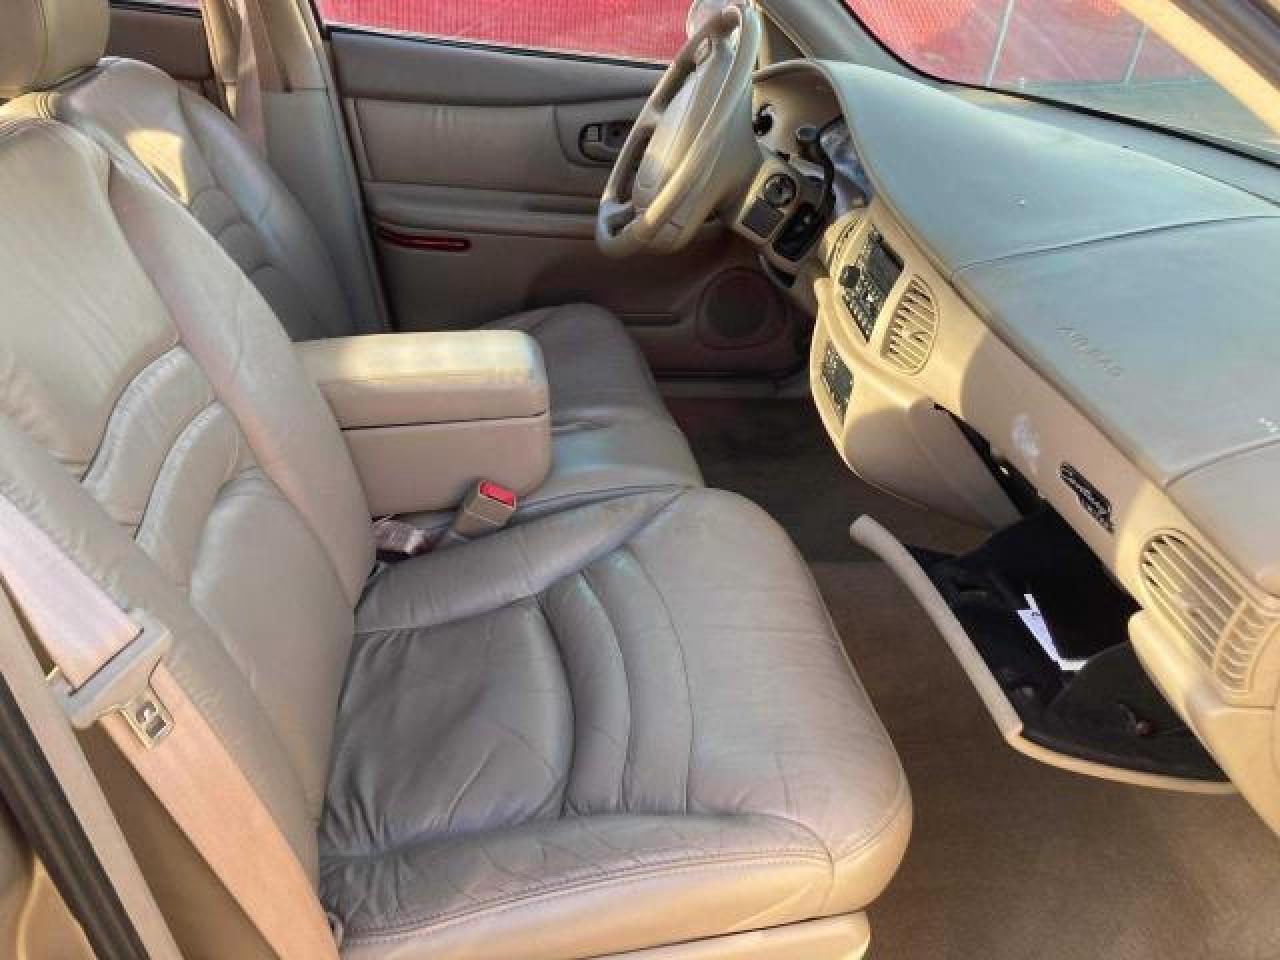 Buick Century for Sale